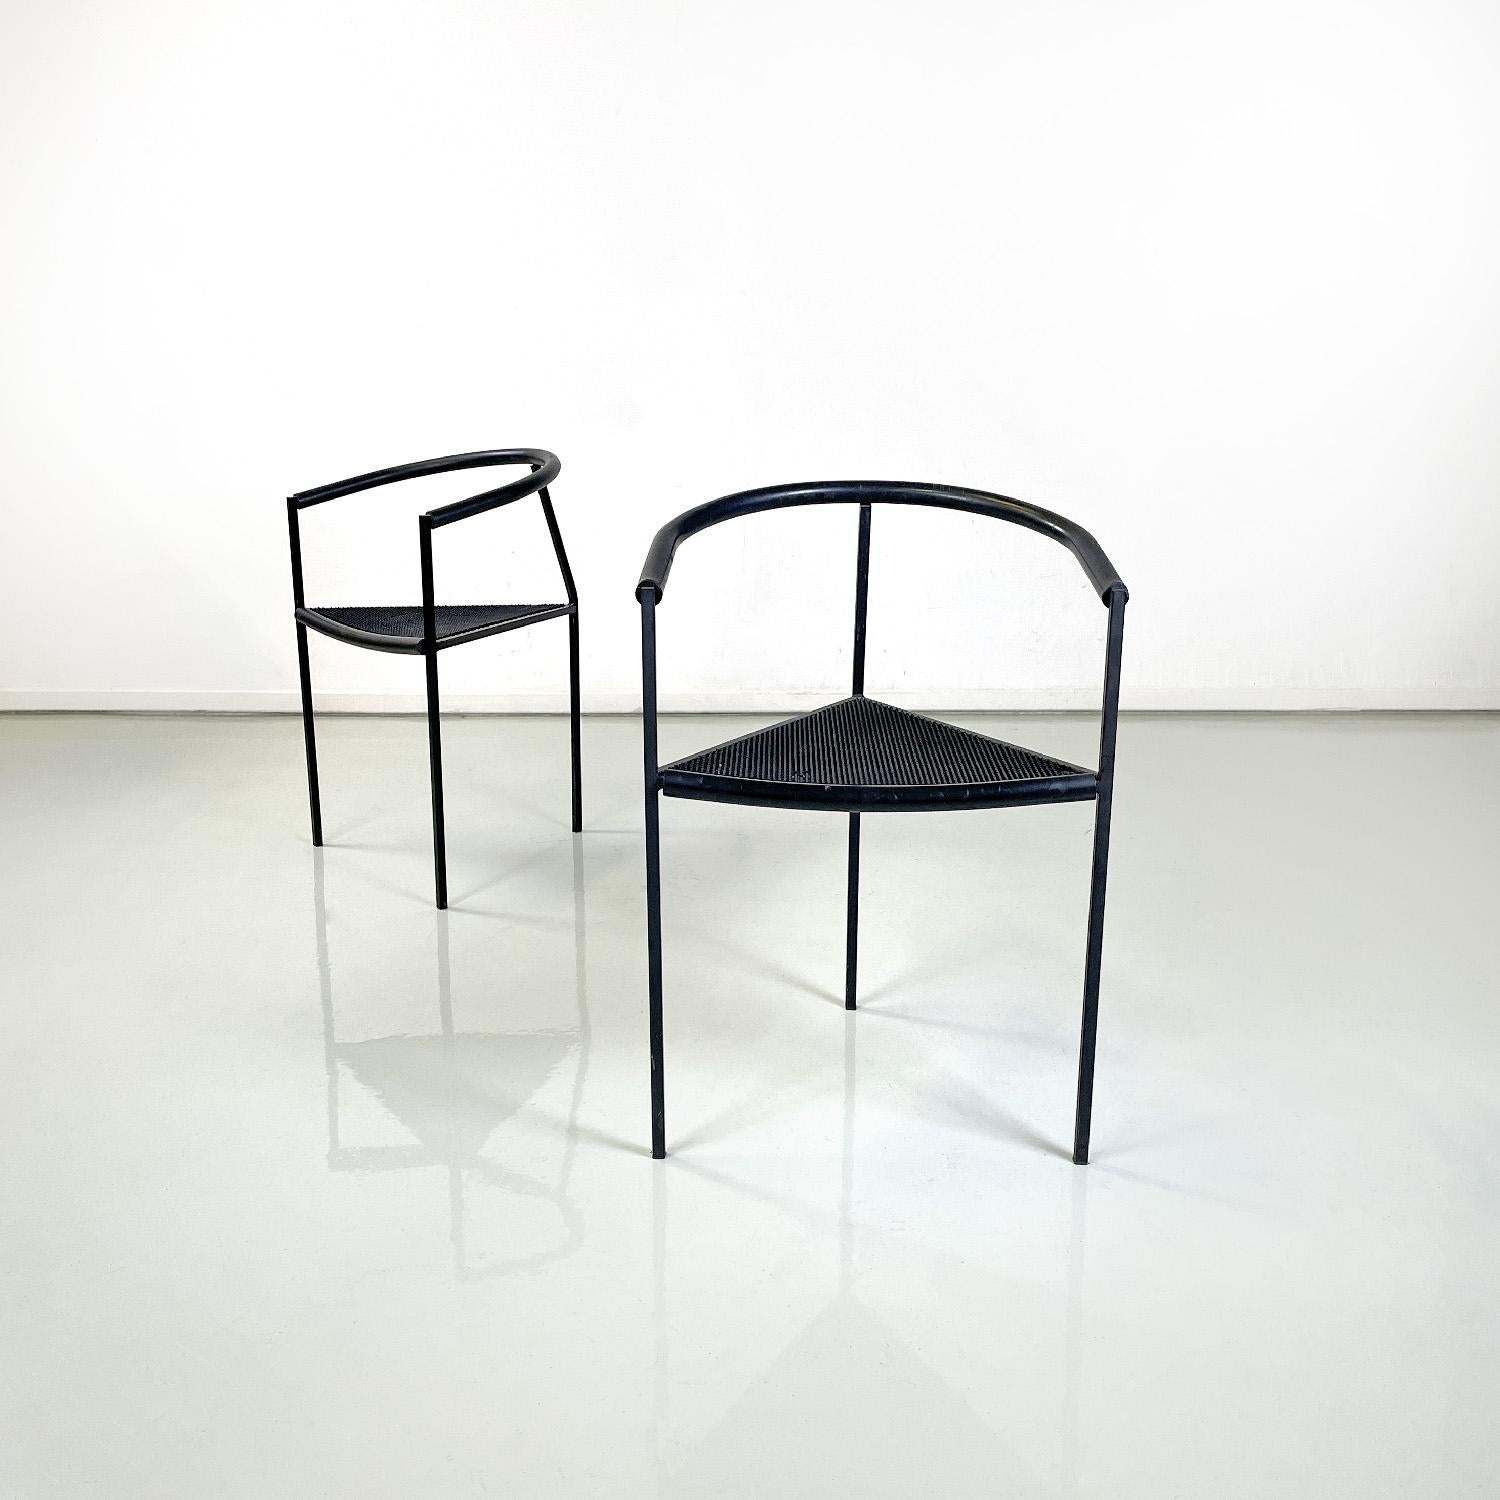 Italian modern black metal chairs by Peregalli and Calatroni for Zeus, 1990s
Pair of chairs with triangular seat in textured black rubber. The structure has a square section in matt black painted steel. The chair has a backrest and armrests covered